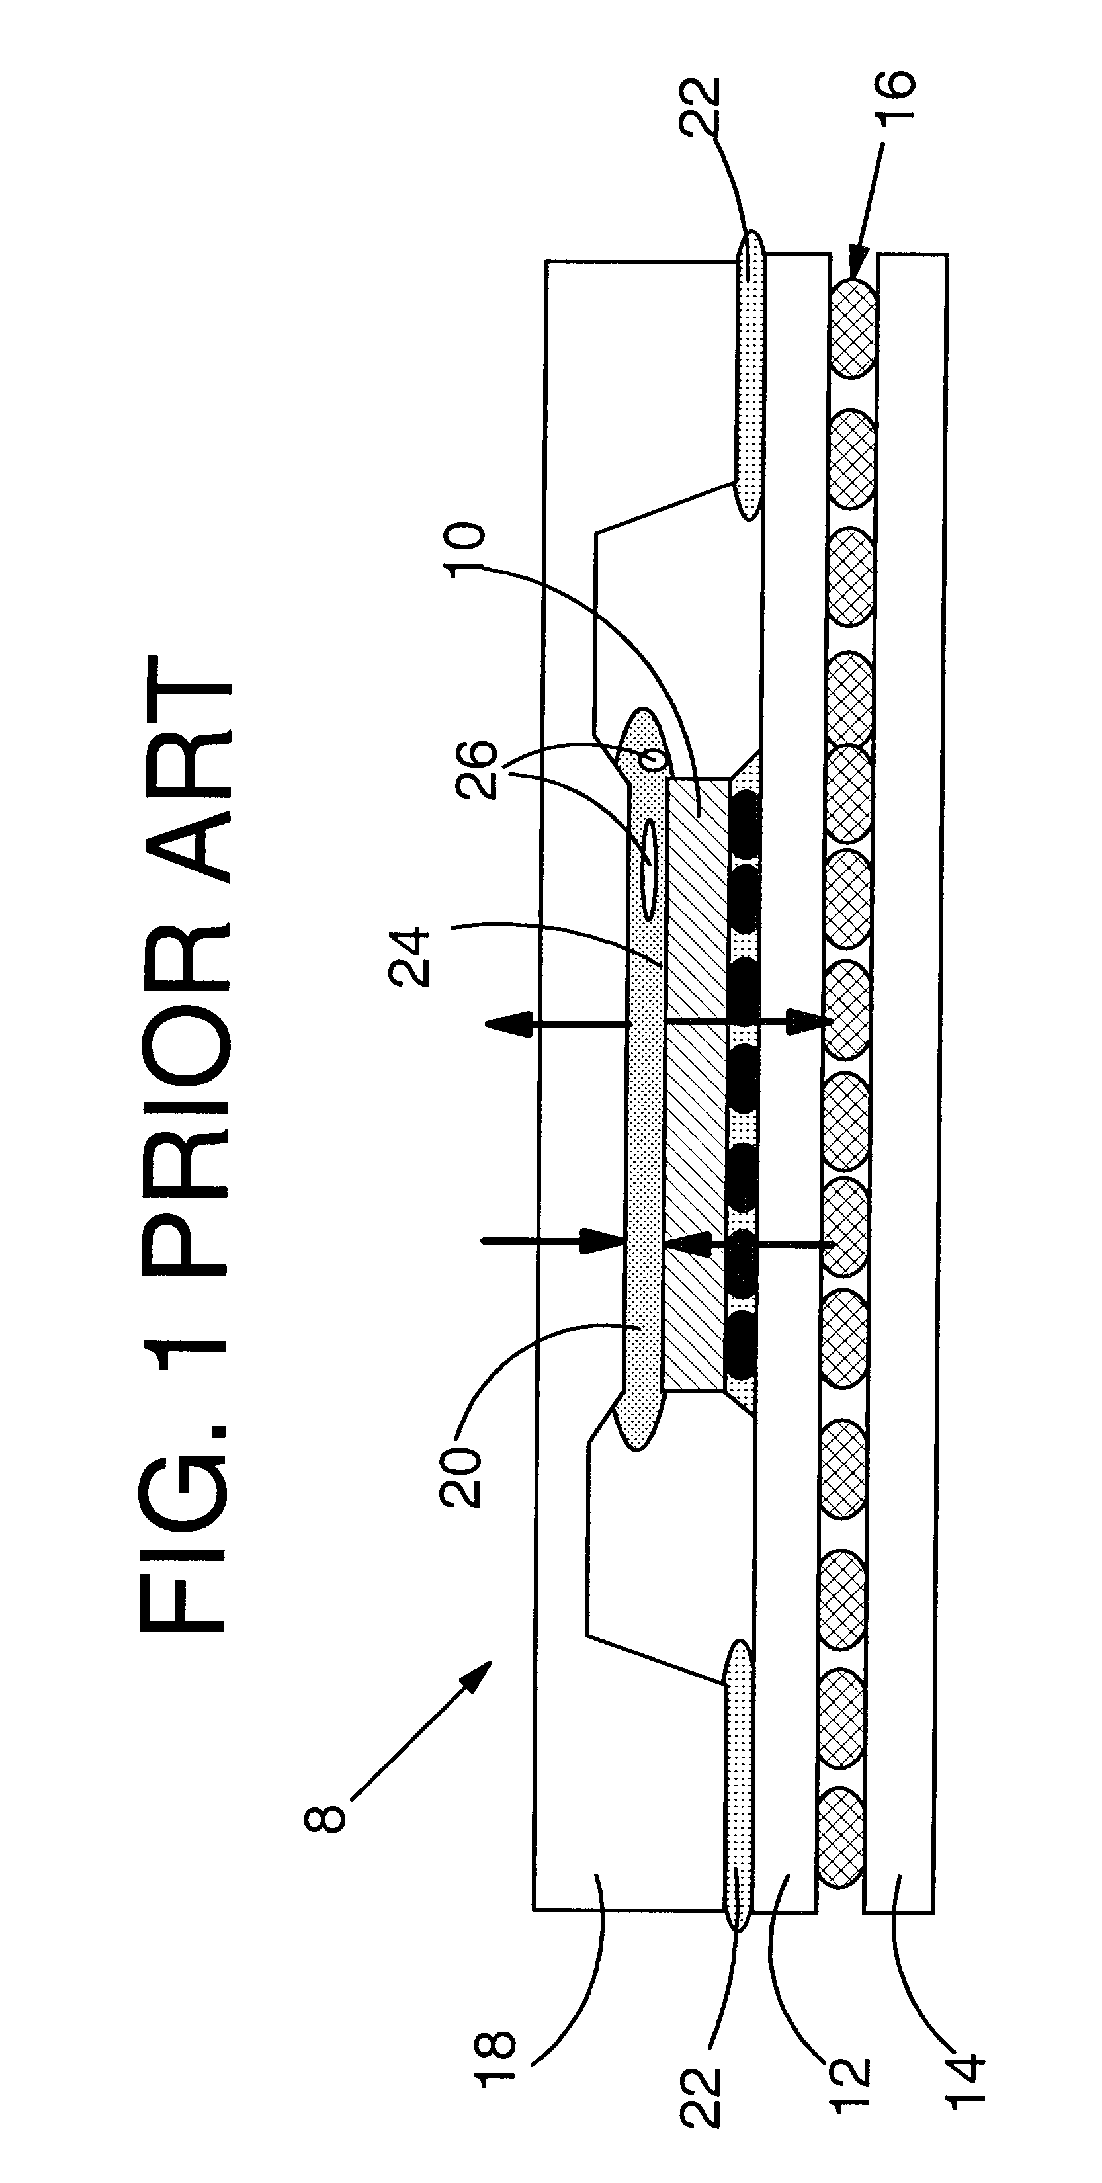 Chip package having chip extension and method